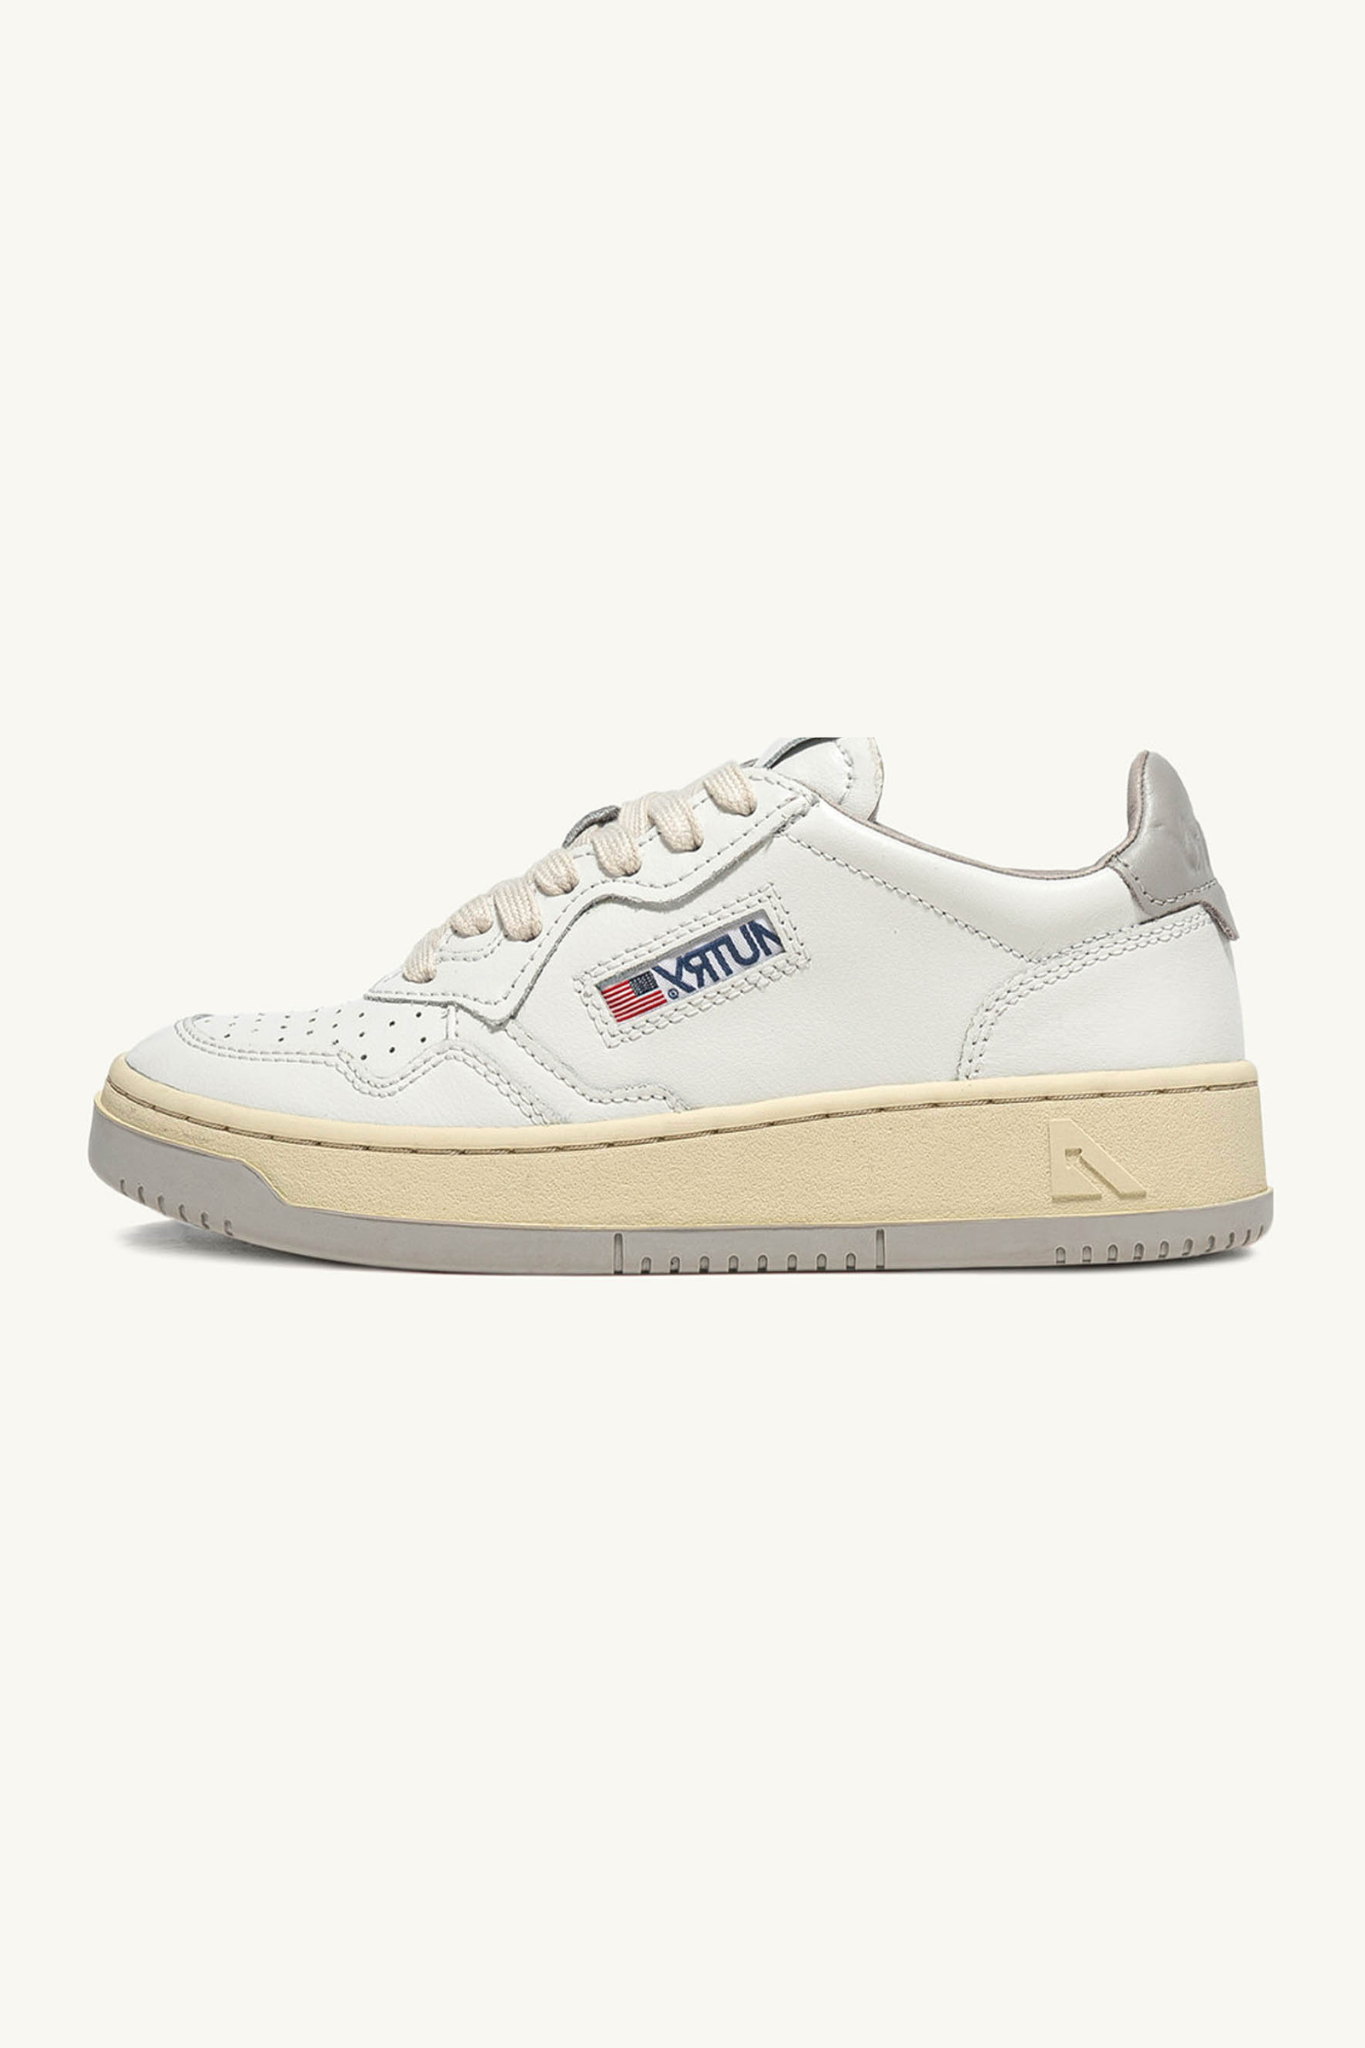 AULM-BB50 - MEDALIST LOW SNEAKERS IN LEATHER COLOR WHITE AND VAPOR